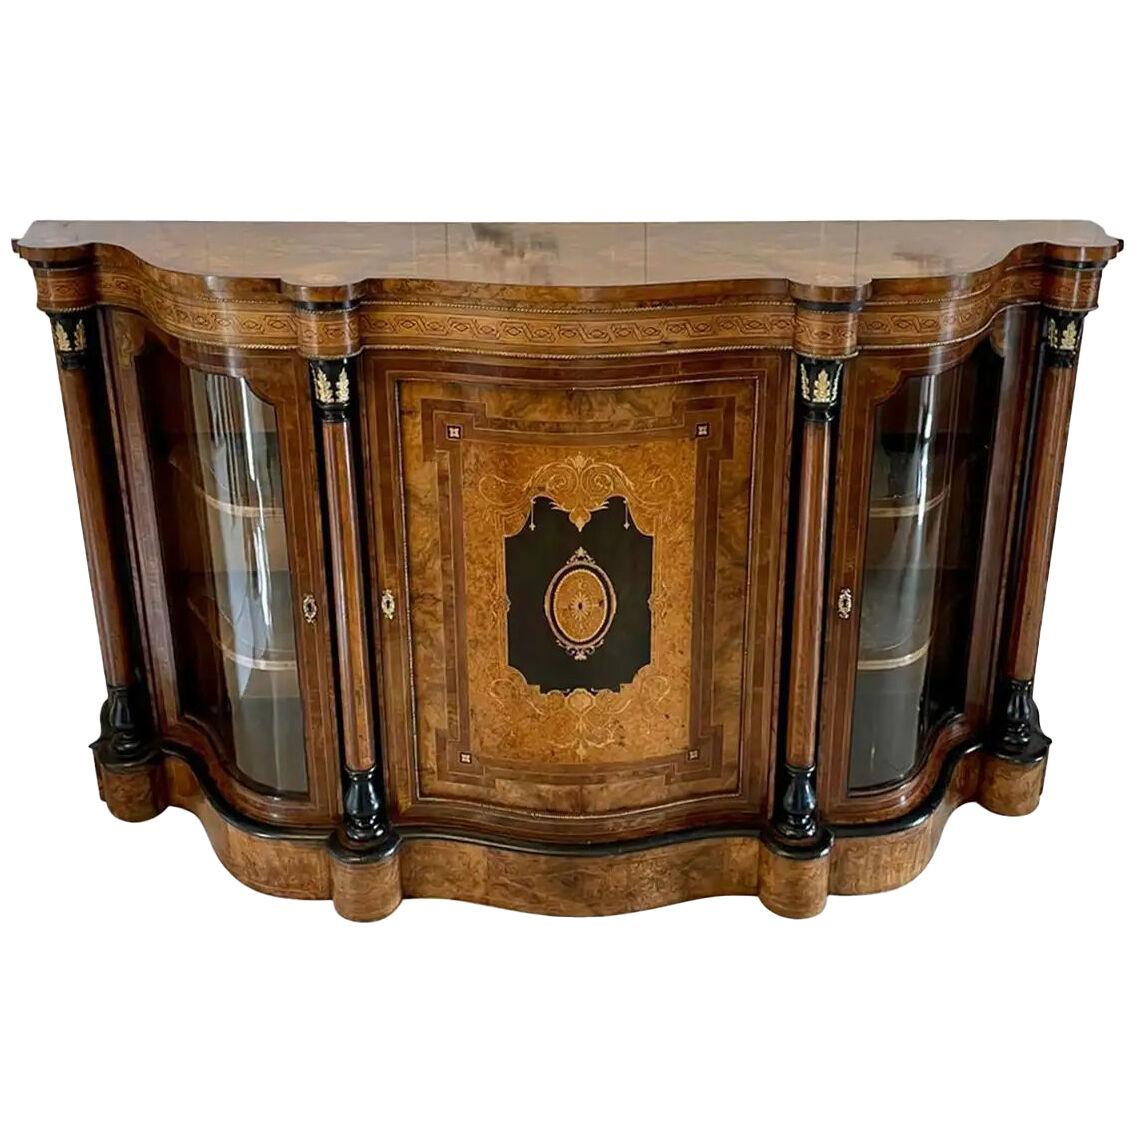 Outstanding Antique Burr Walnut Marquetry Inlaid Serpentine Shaped Credenza